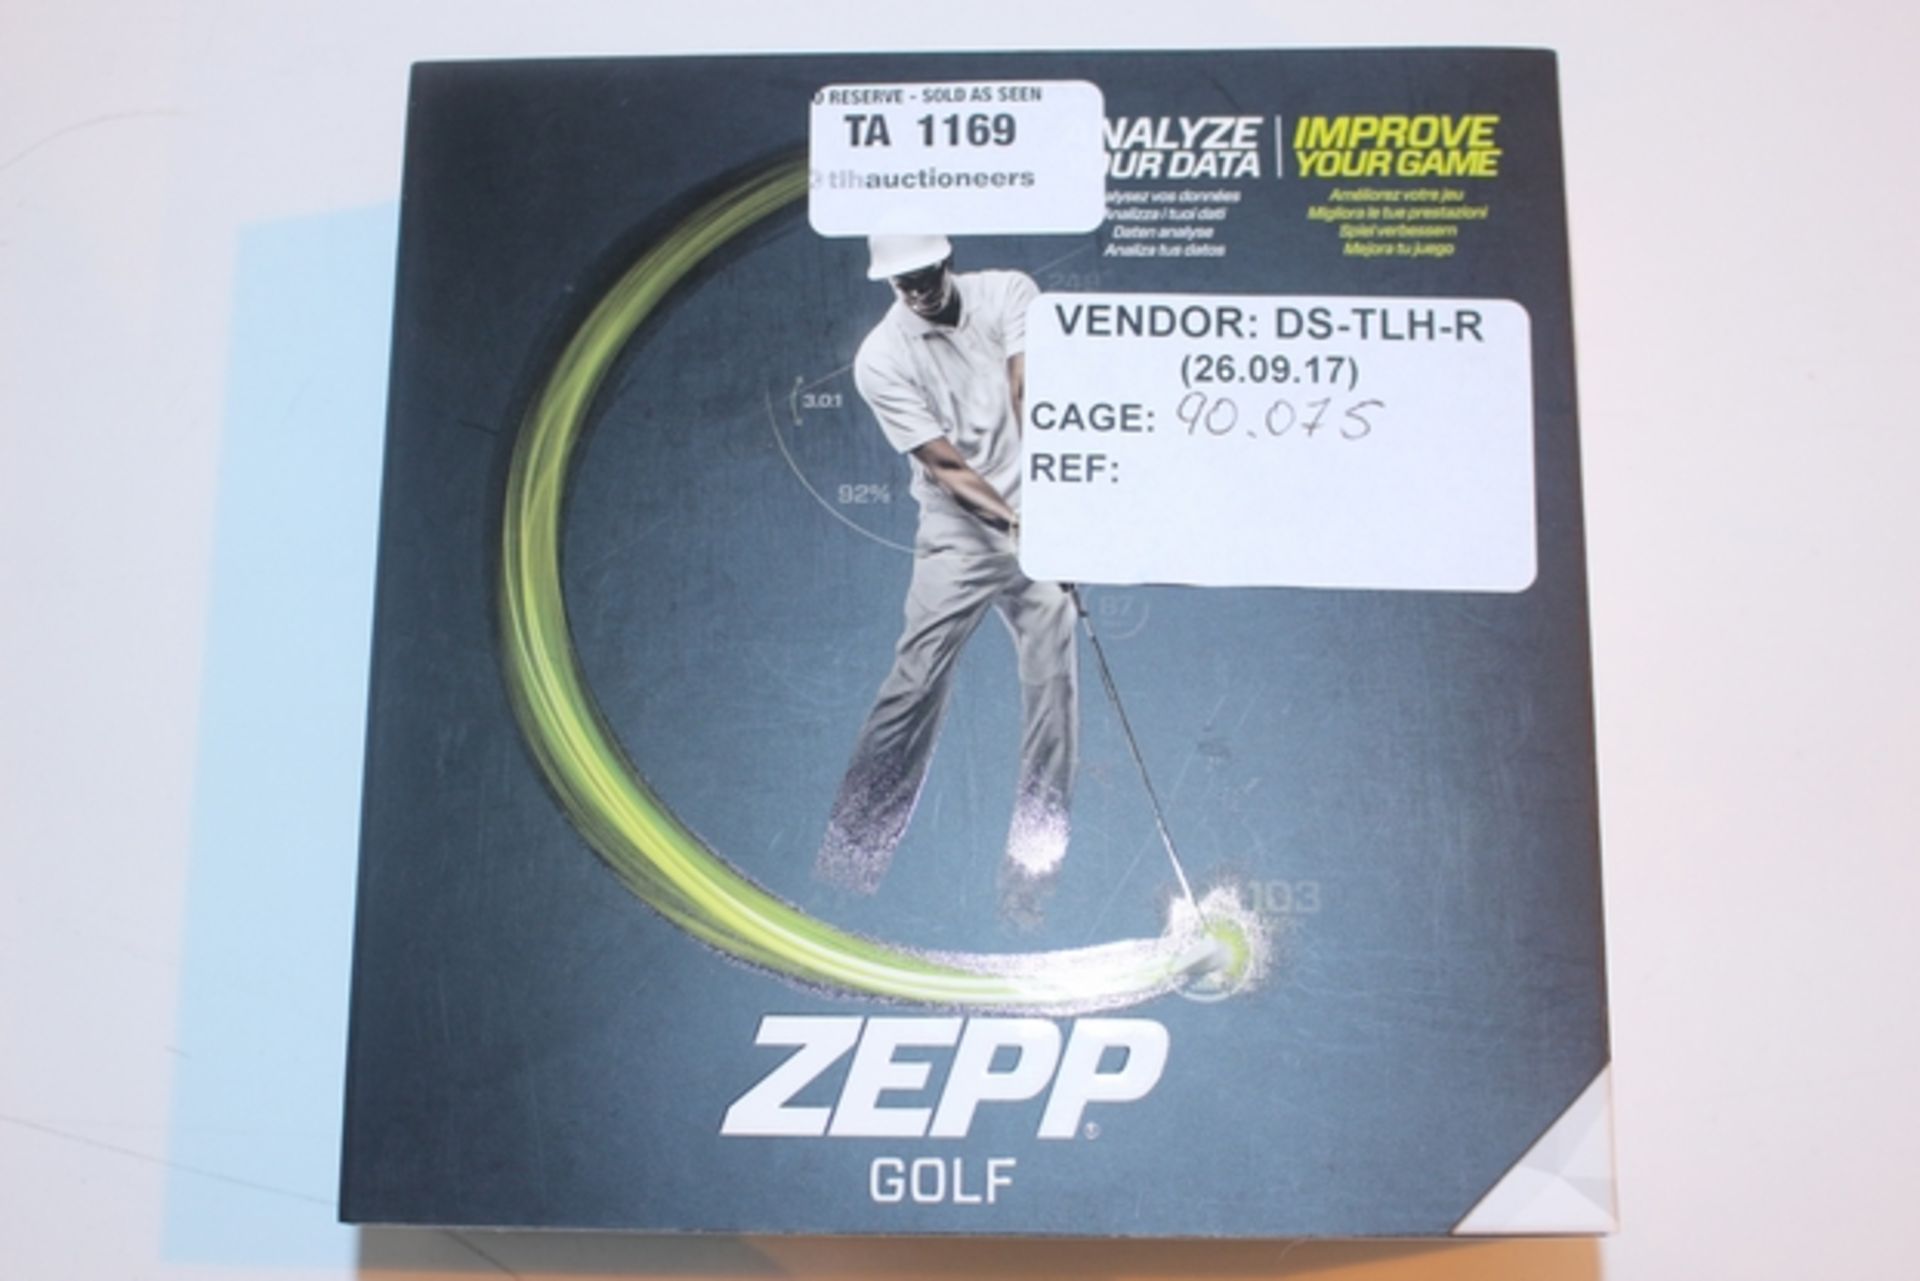 1X BOXED ZEPP GOLF (DS-TLH-R) (90.075) - Image 2 of 2